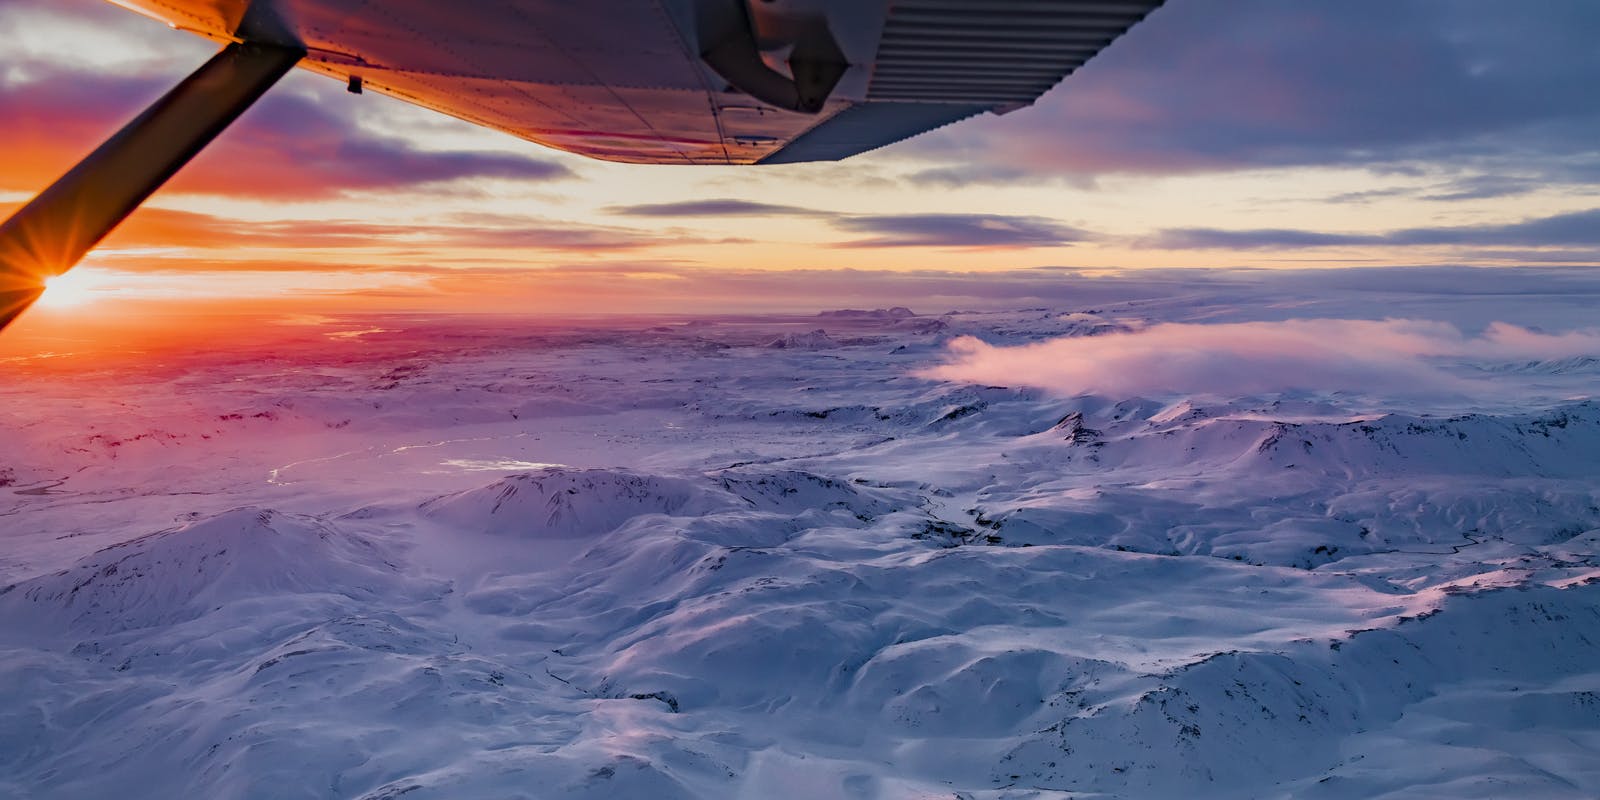 Katla seen from the air